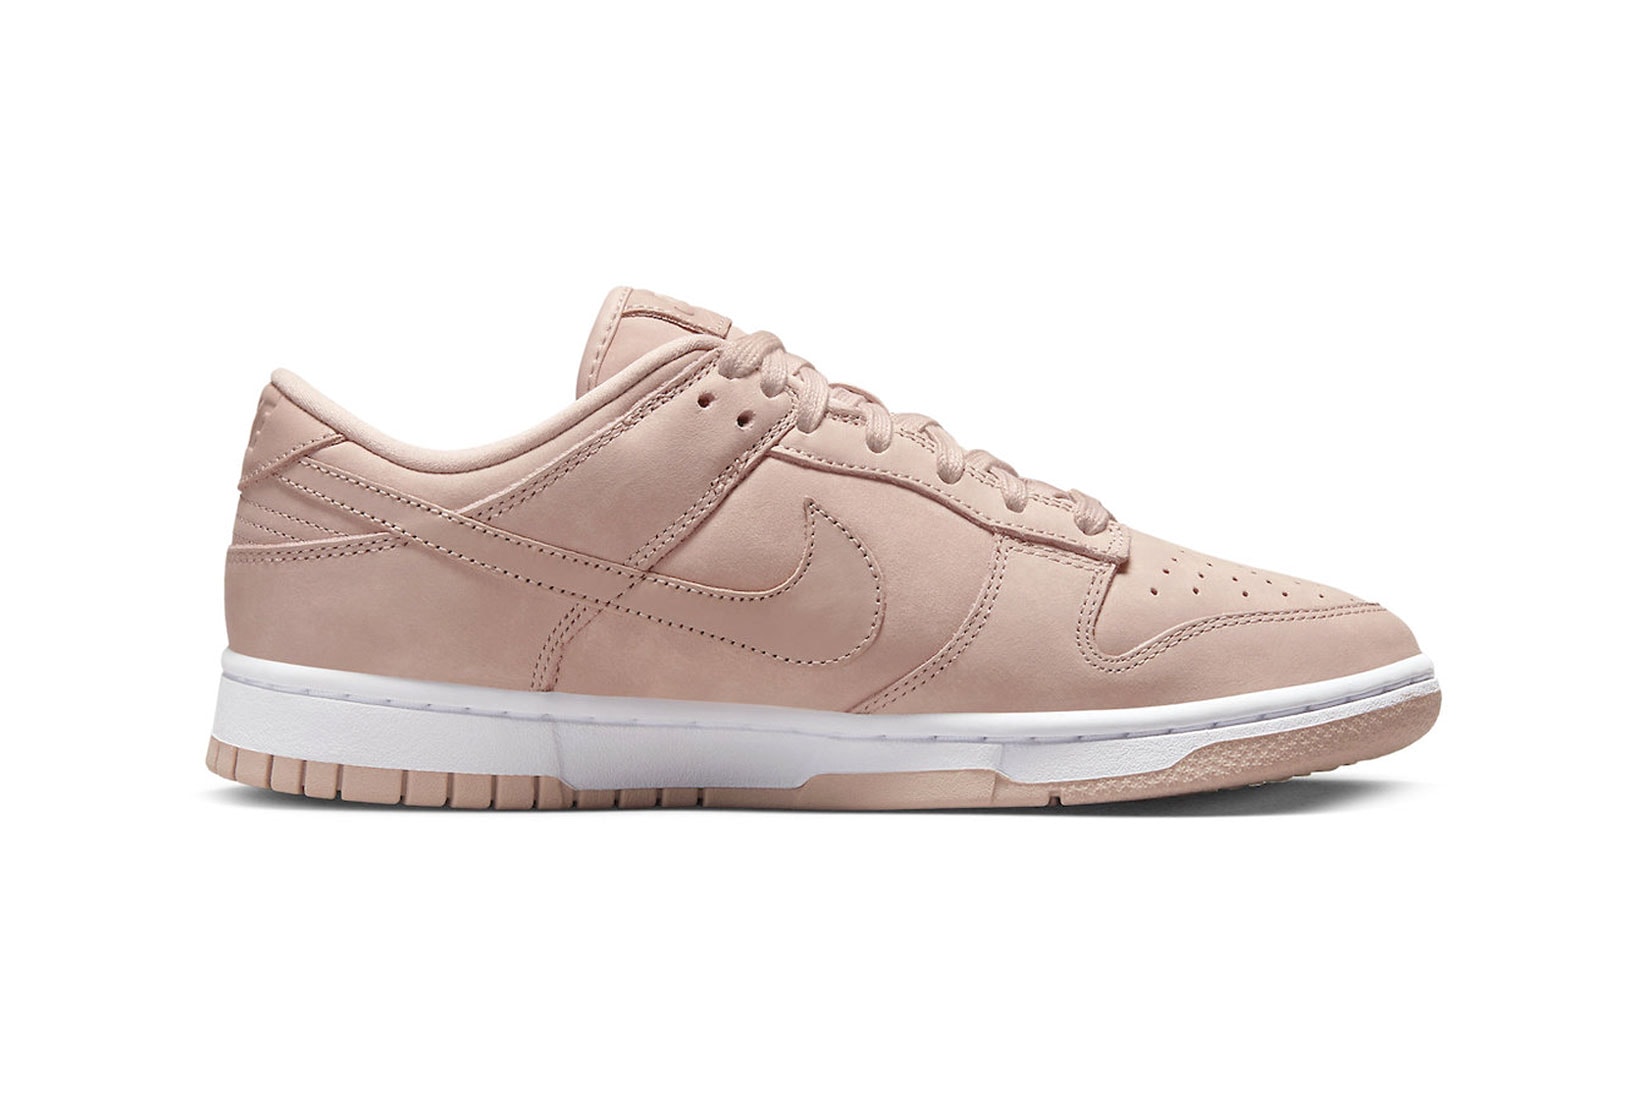 Nike Dunk Low PRM Premium Women's Sneakers Coral Pink Release Images Where to buy Pink Oxford 